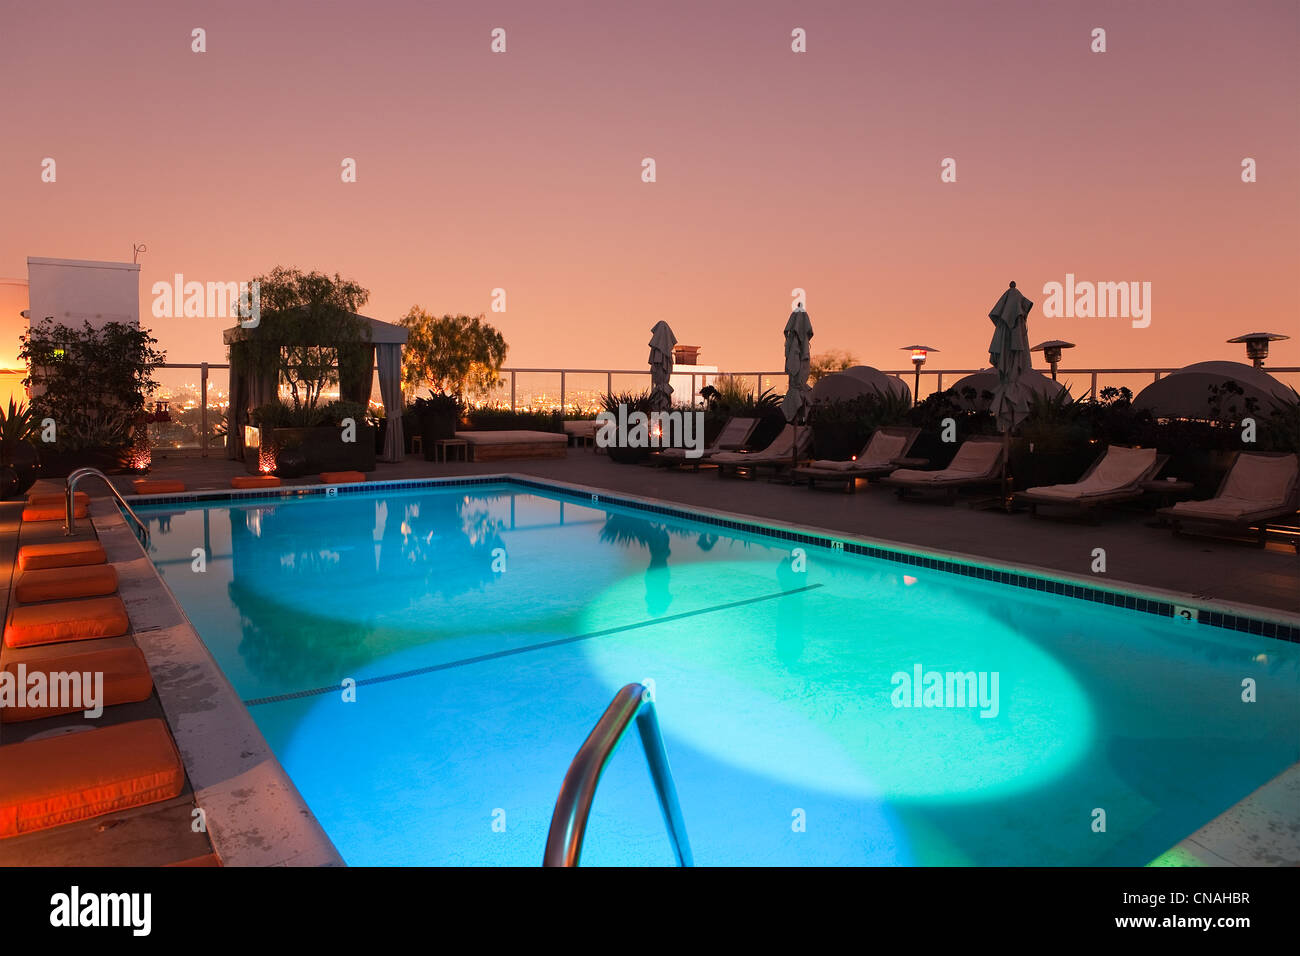 United States, California, Los Angeles, West Hollywood, Andaz Hotel located on Sunset Boulevard, the swimming pool Stock Photo